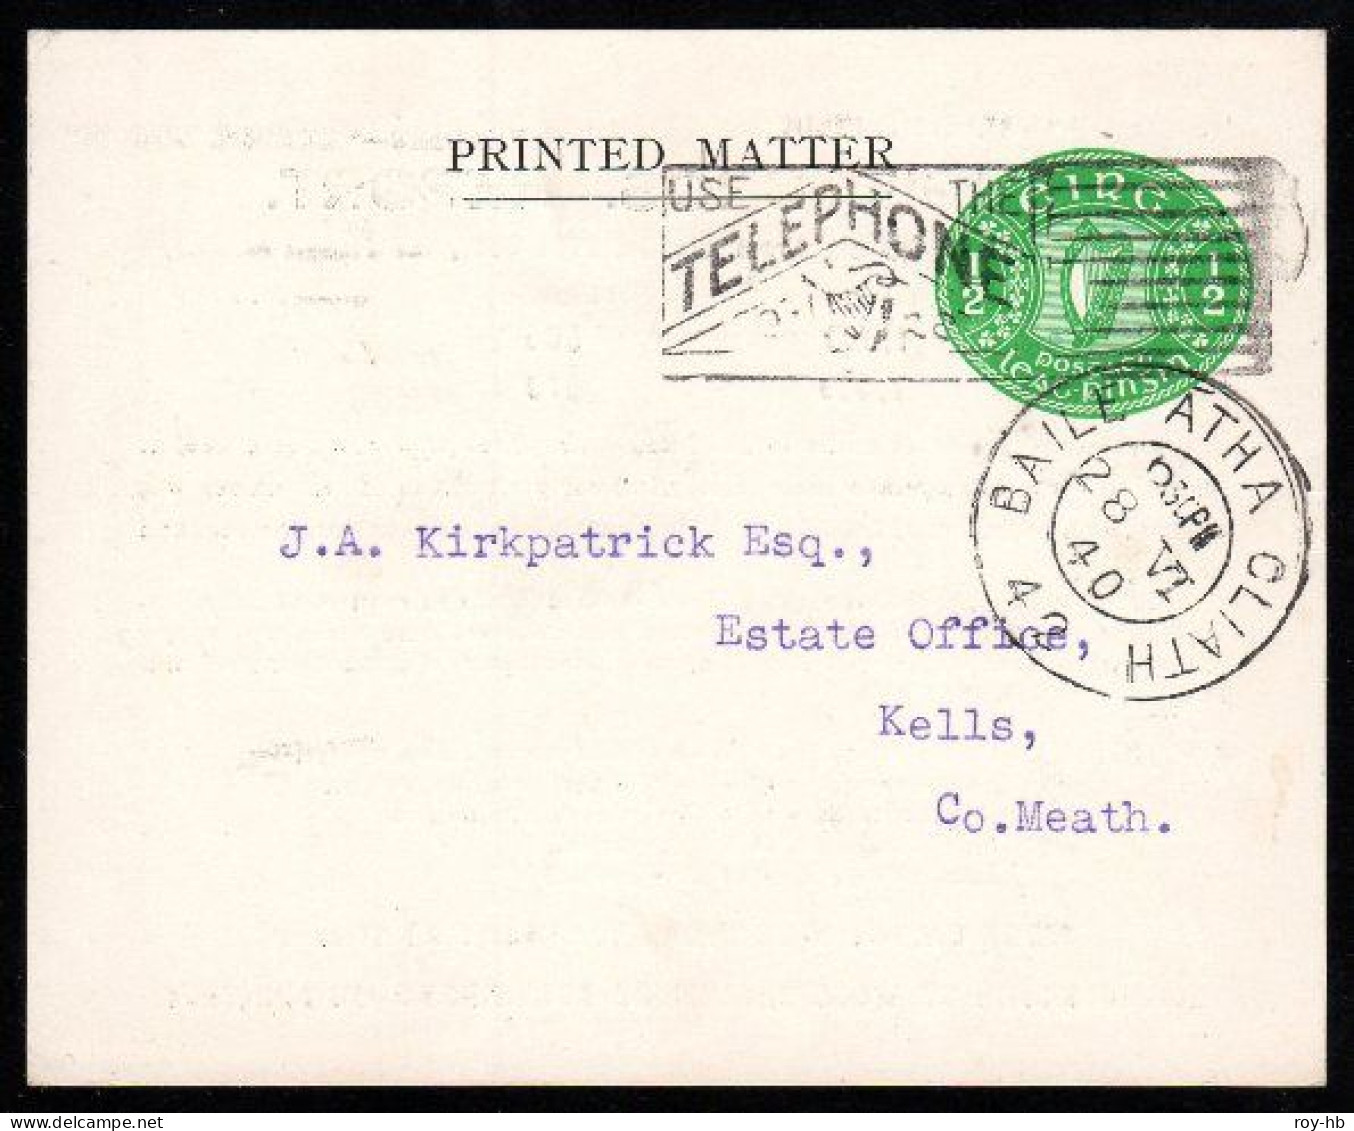 Stamped To Order Craigie Bros. 1940 ½d Post Card Very Fine Used From Dublin To Kells, Very Clean, No Filing Hole. - Postal Stationery